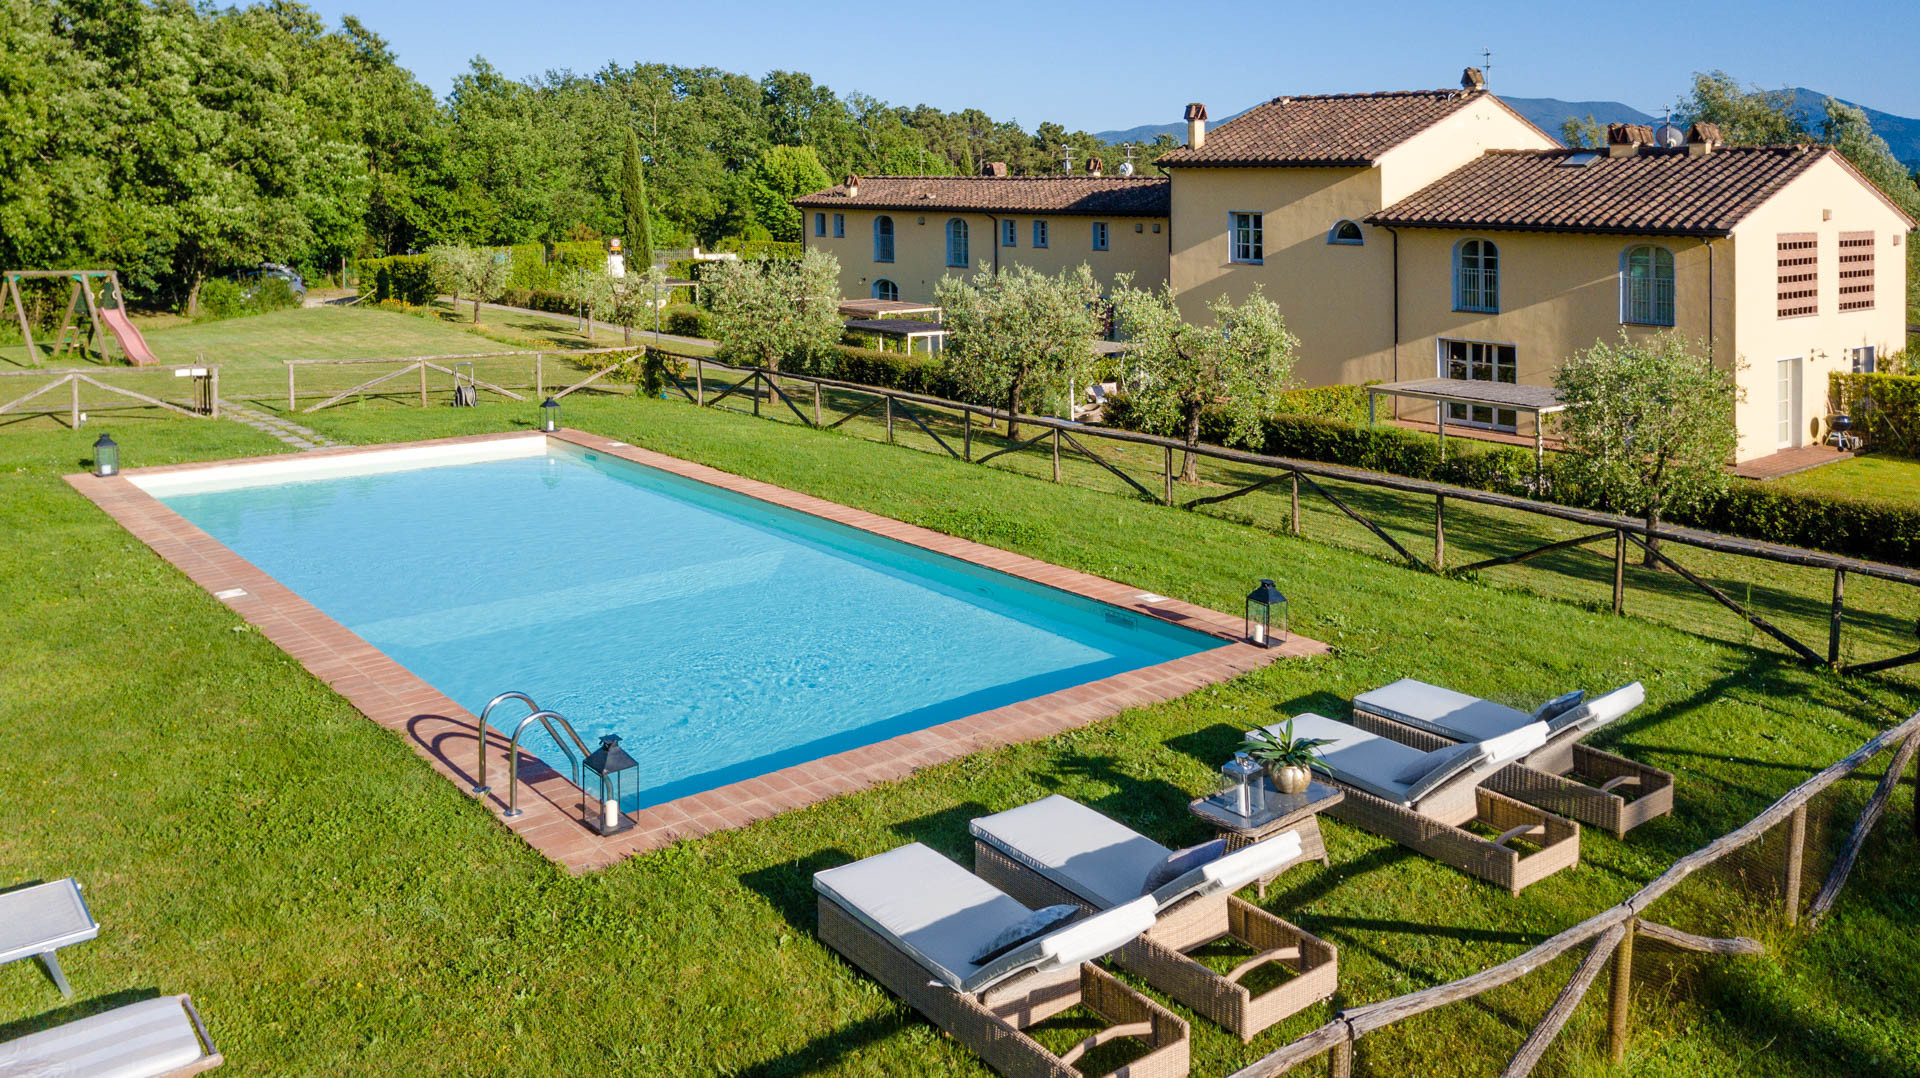 Villa/Dettached house in Lucca - Villa Hilary, a Convenient Luxury 4 bedrooms Villa with Sharing Pool on the Hills by Lucca